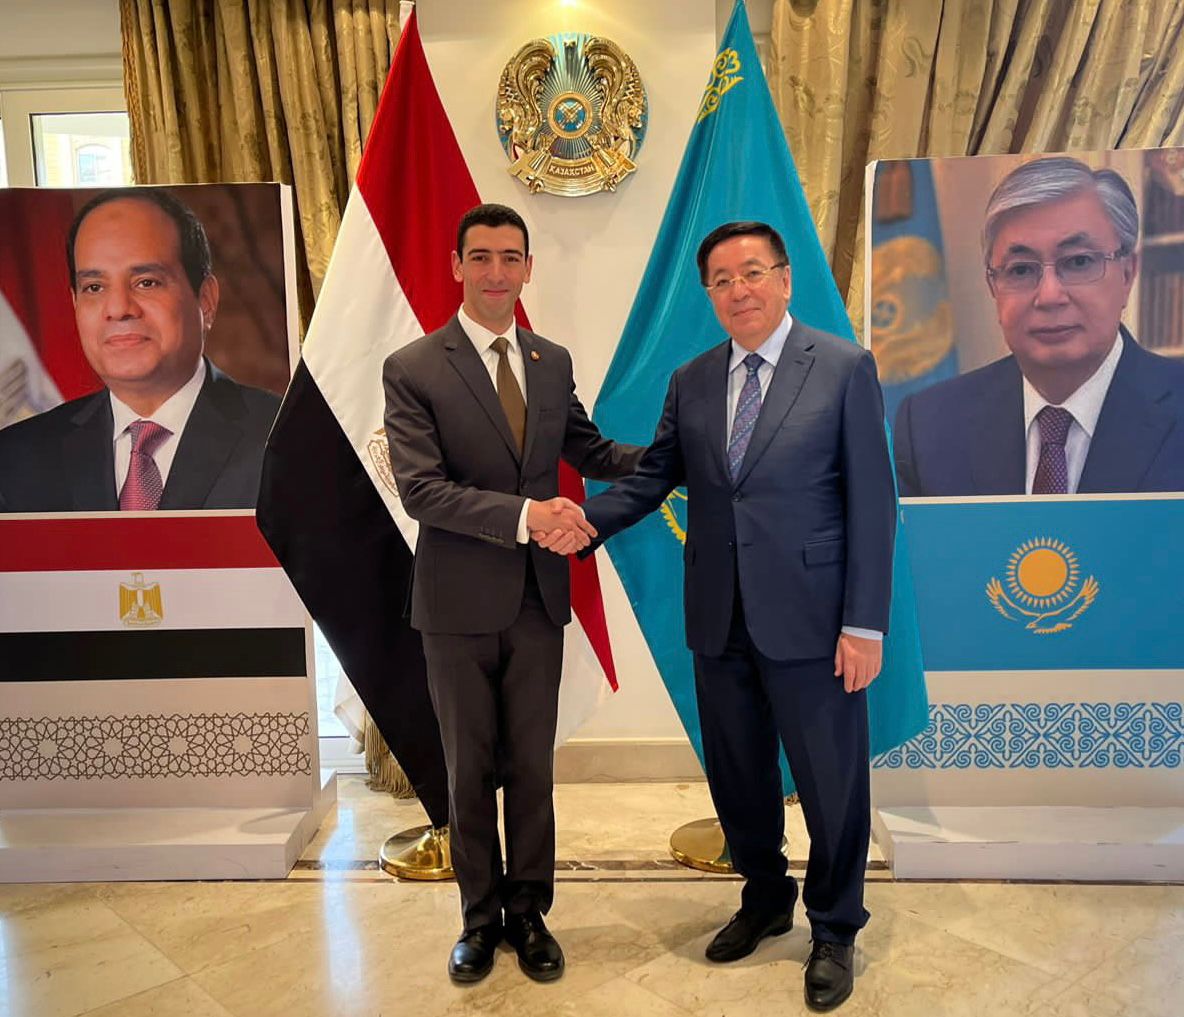 Egypt supports political and economic reforms in Kazakhstan